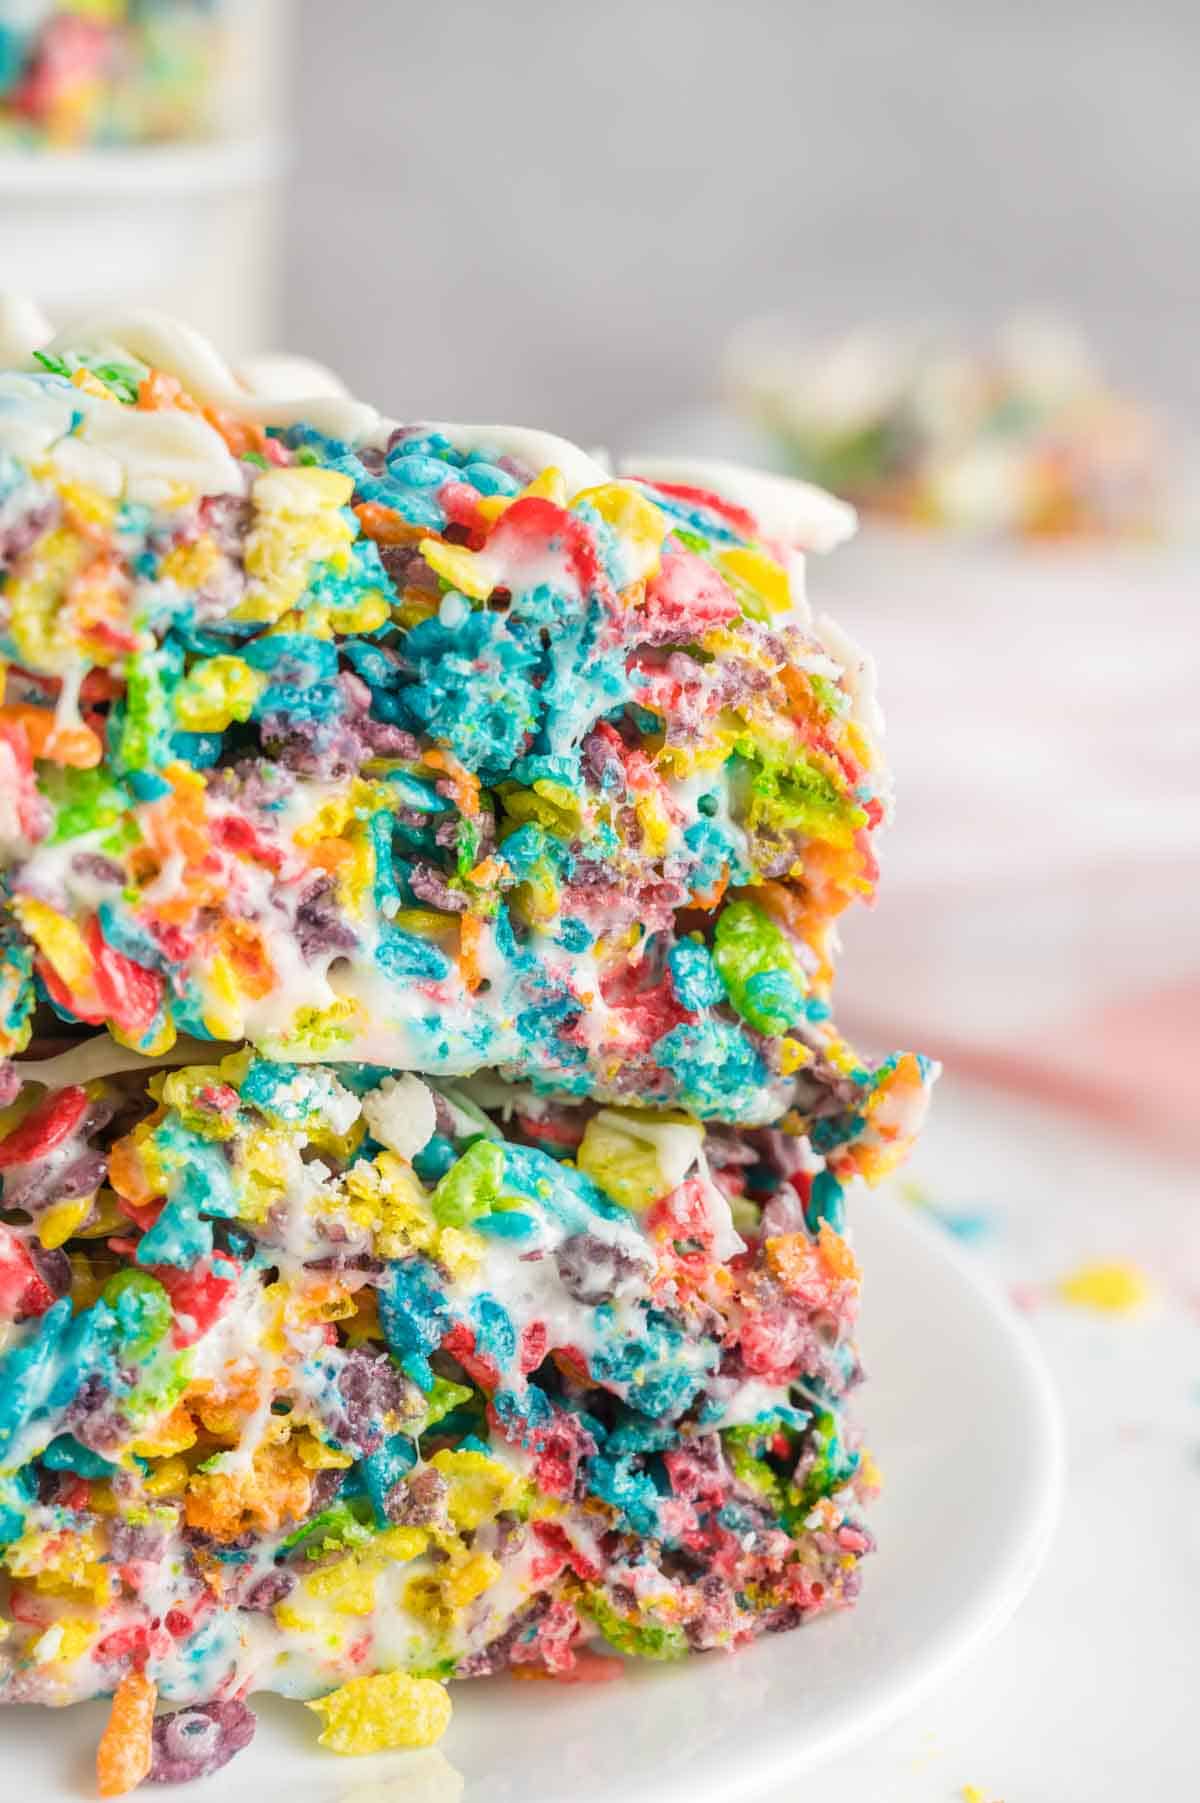 Two fruity pebbles treats stacked on top of each other are shown in a side view.